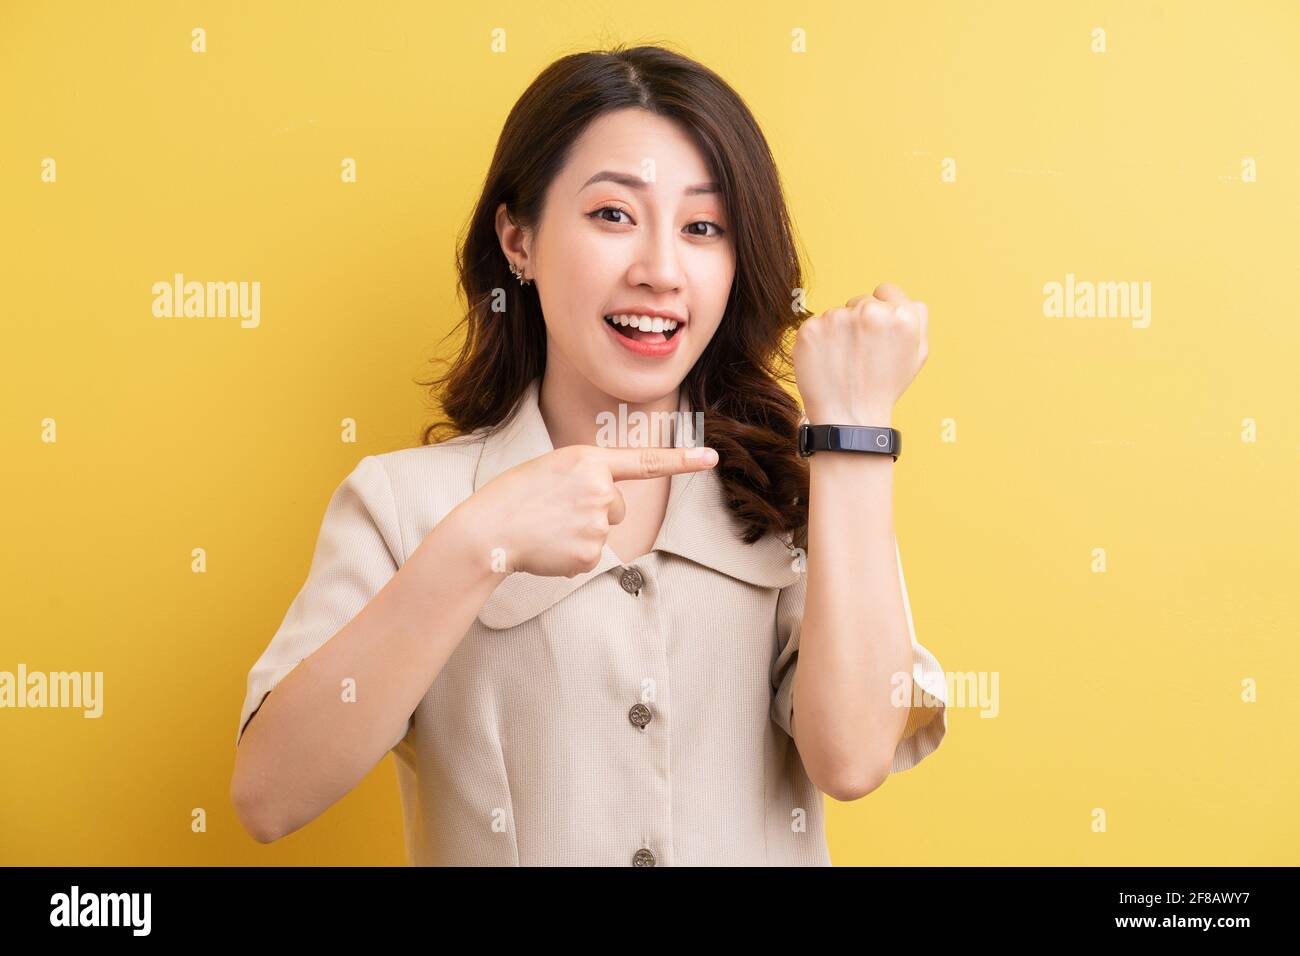 Smart band hi-res stock photography and images - Alamy